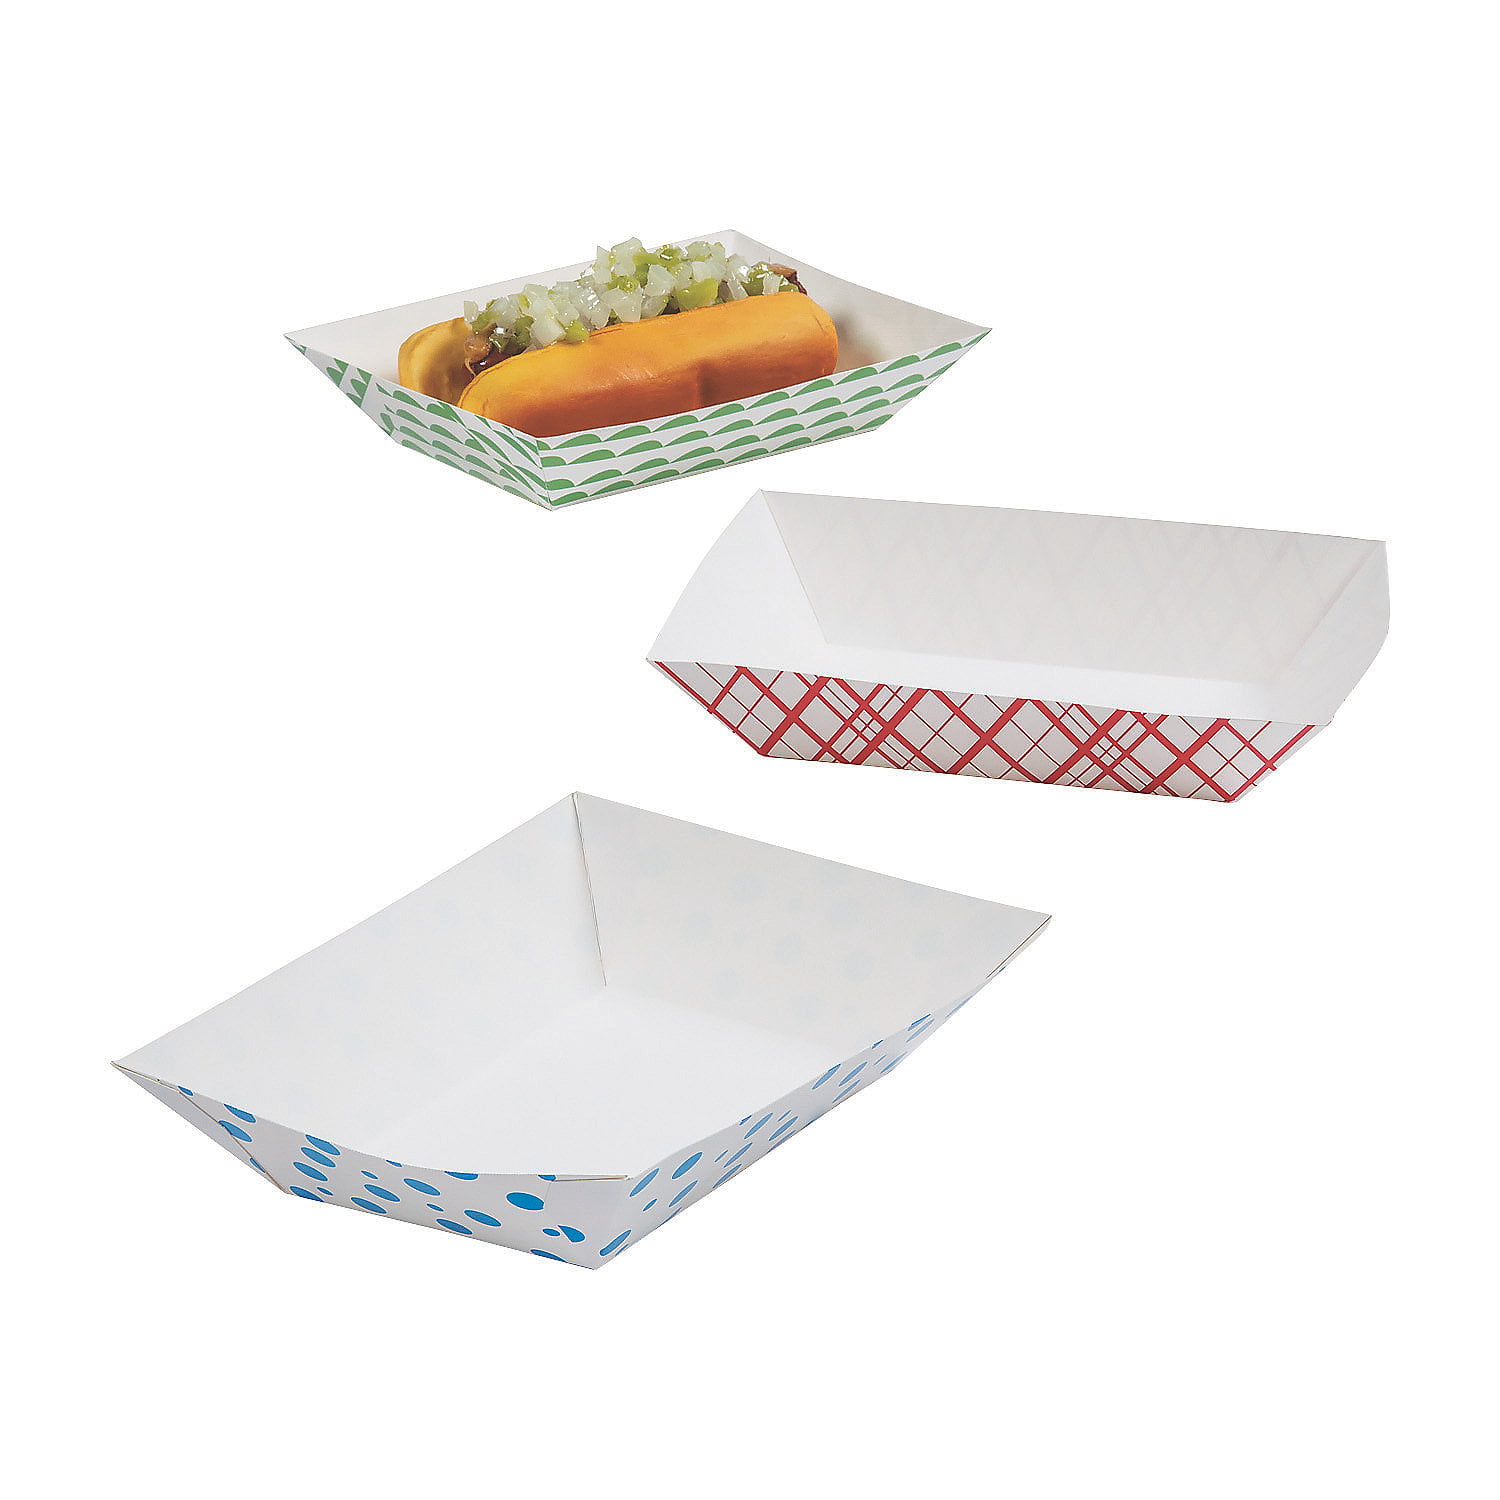 Grease-Proof Sturdy Food Trays 5 lb Capacity 50 Pack by Eucatus Serve Hot or... 